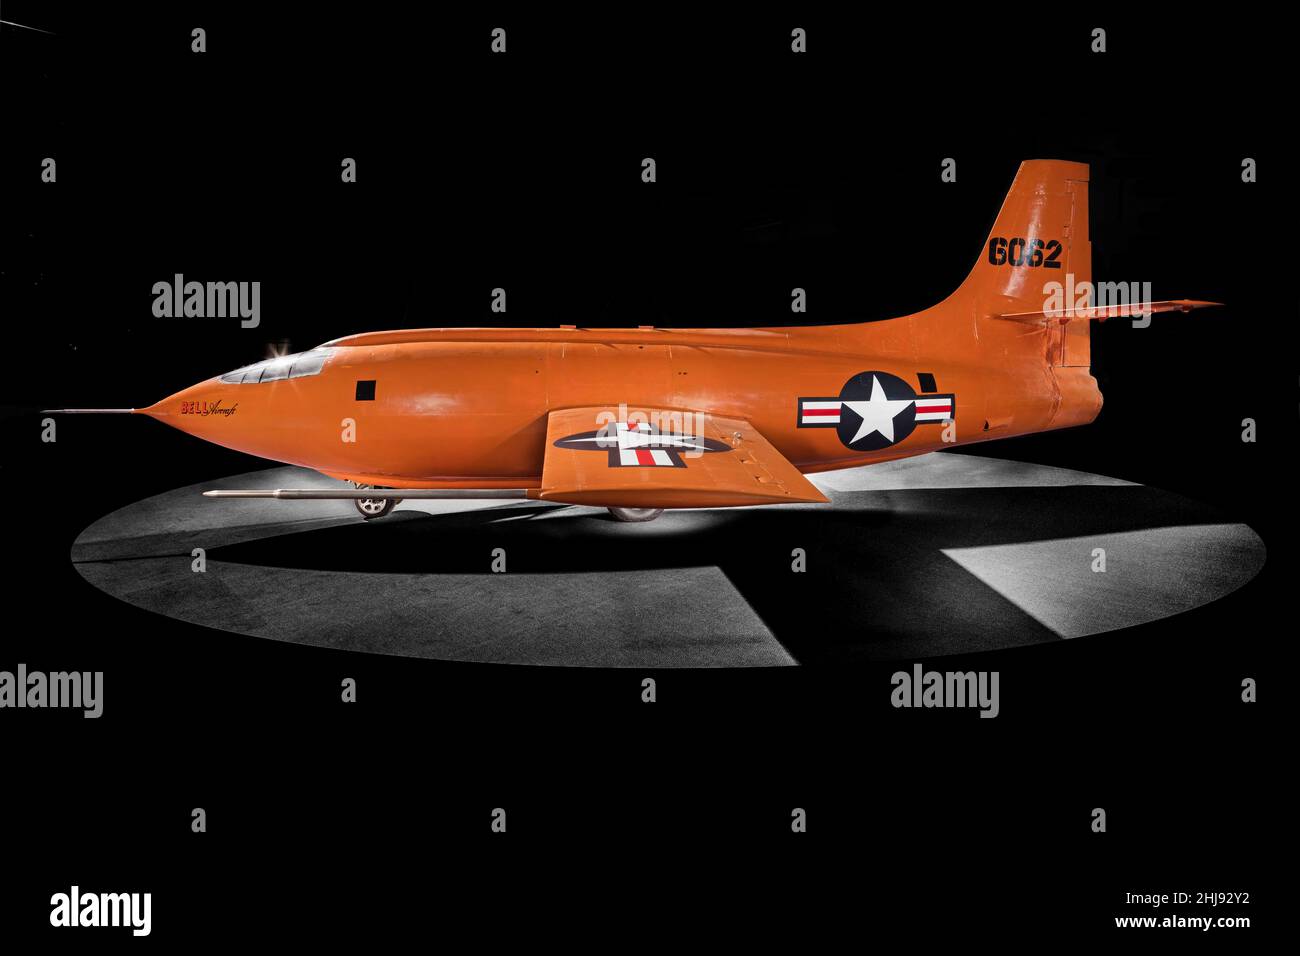 Left side view of the Bell X-1 'Glamorous Glennis' rocket plane  with international orange paint scheme,  National Air and Space Museum, Washington, DC, USA Stock Photo